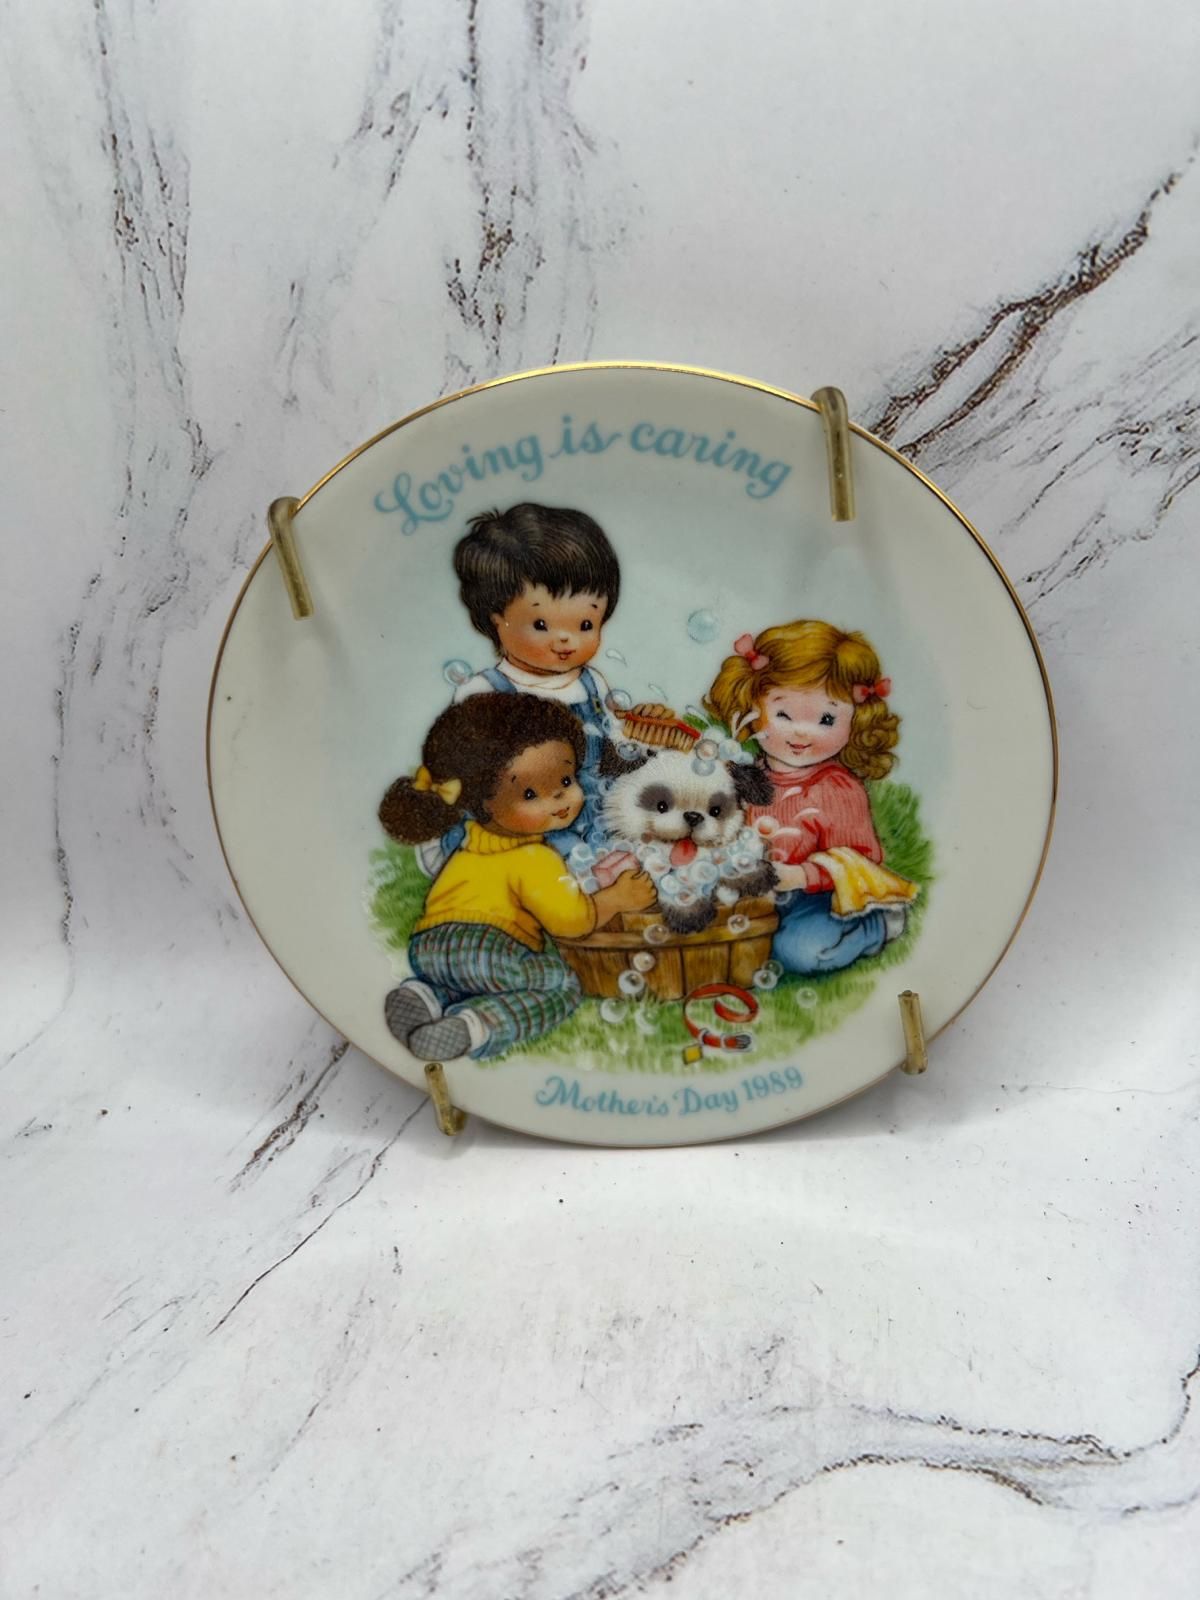 Vintage Avon Mother's Day Porcelain Plate Loving Is Caring 1989 NWOB